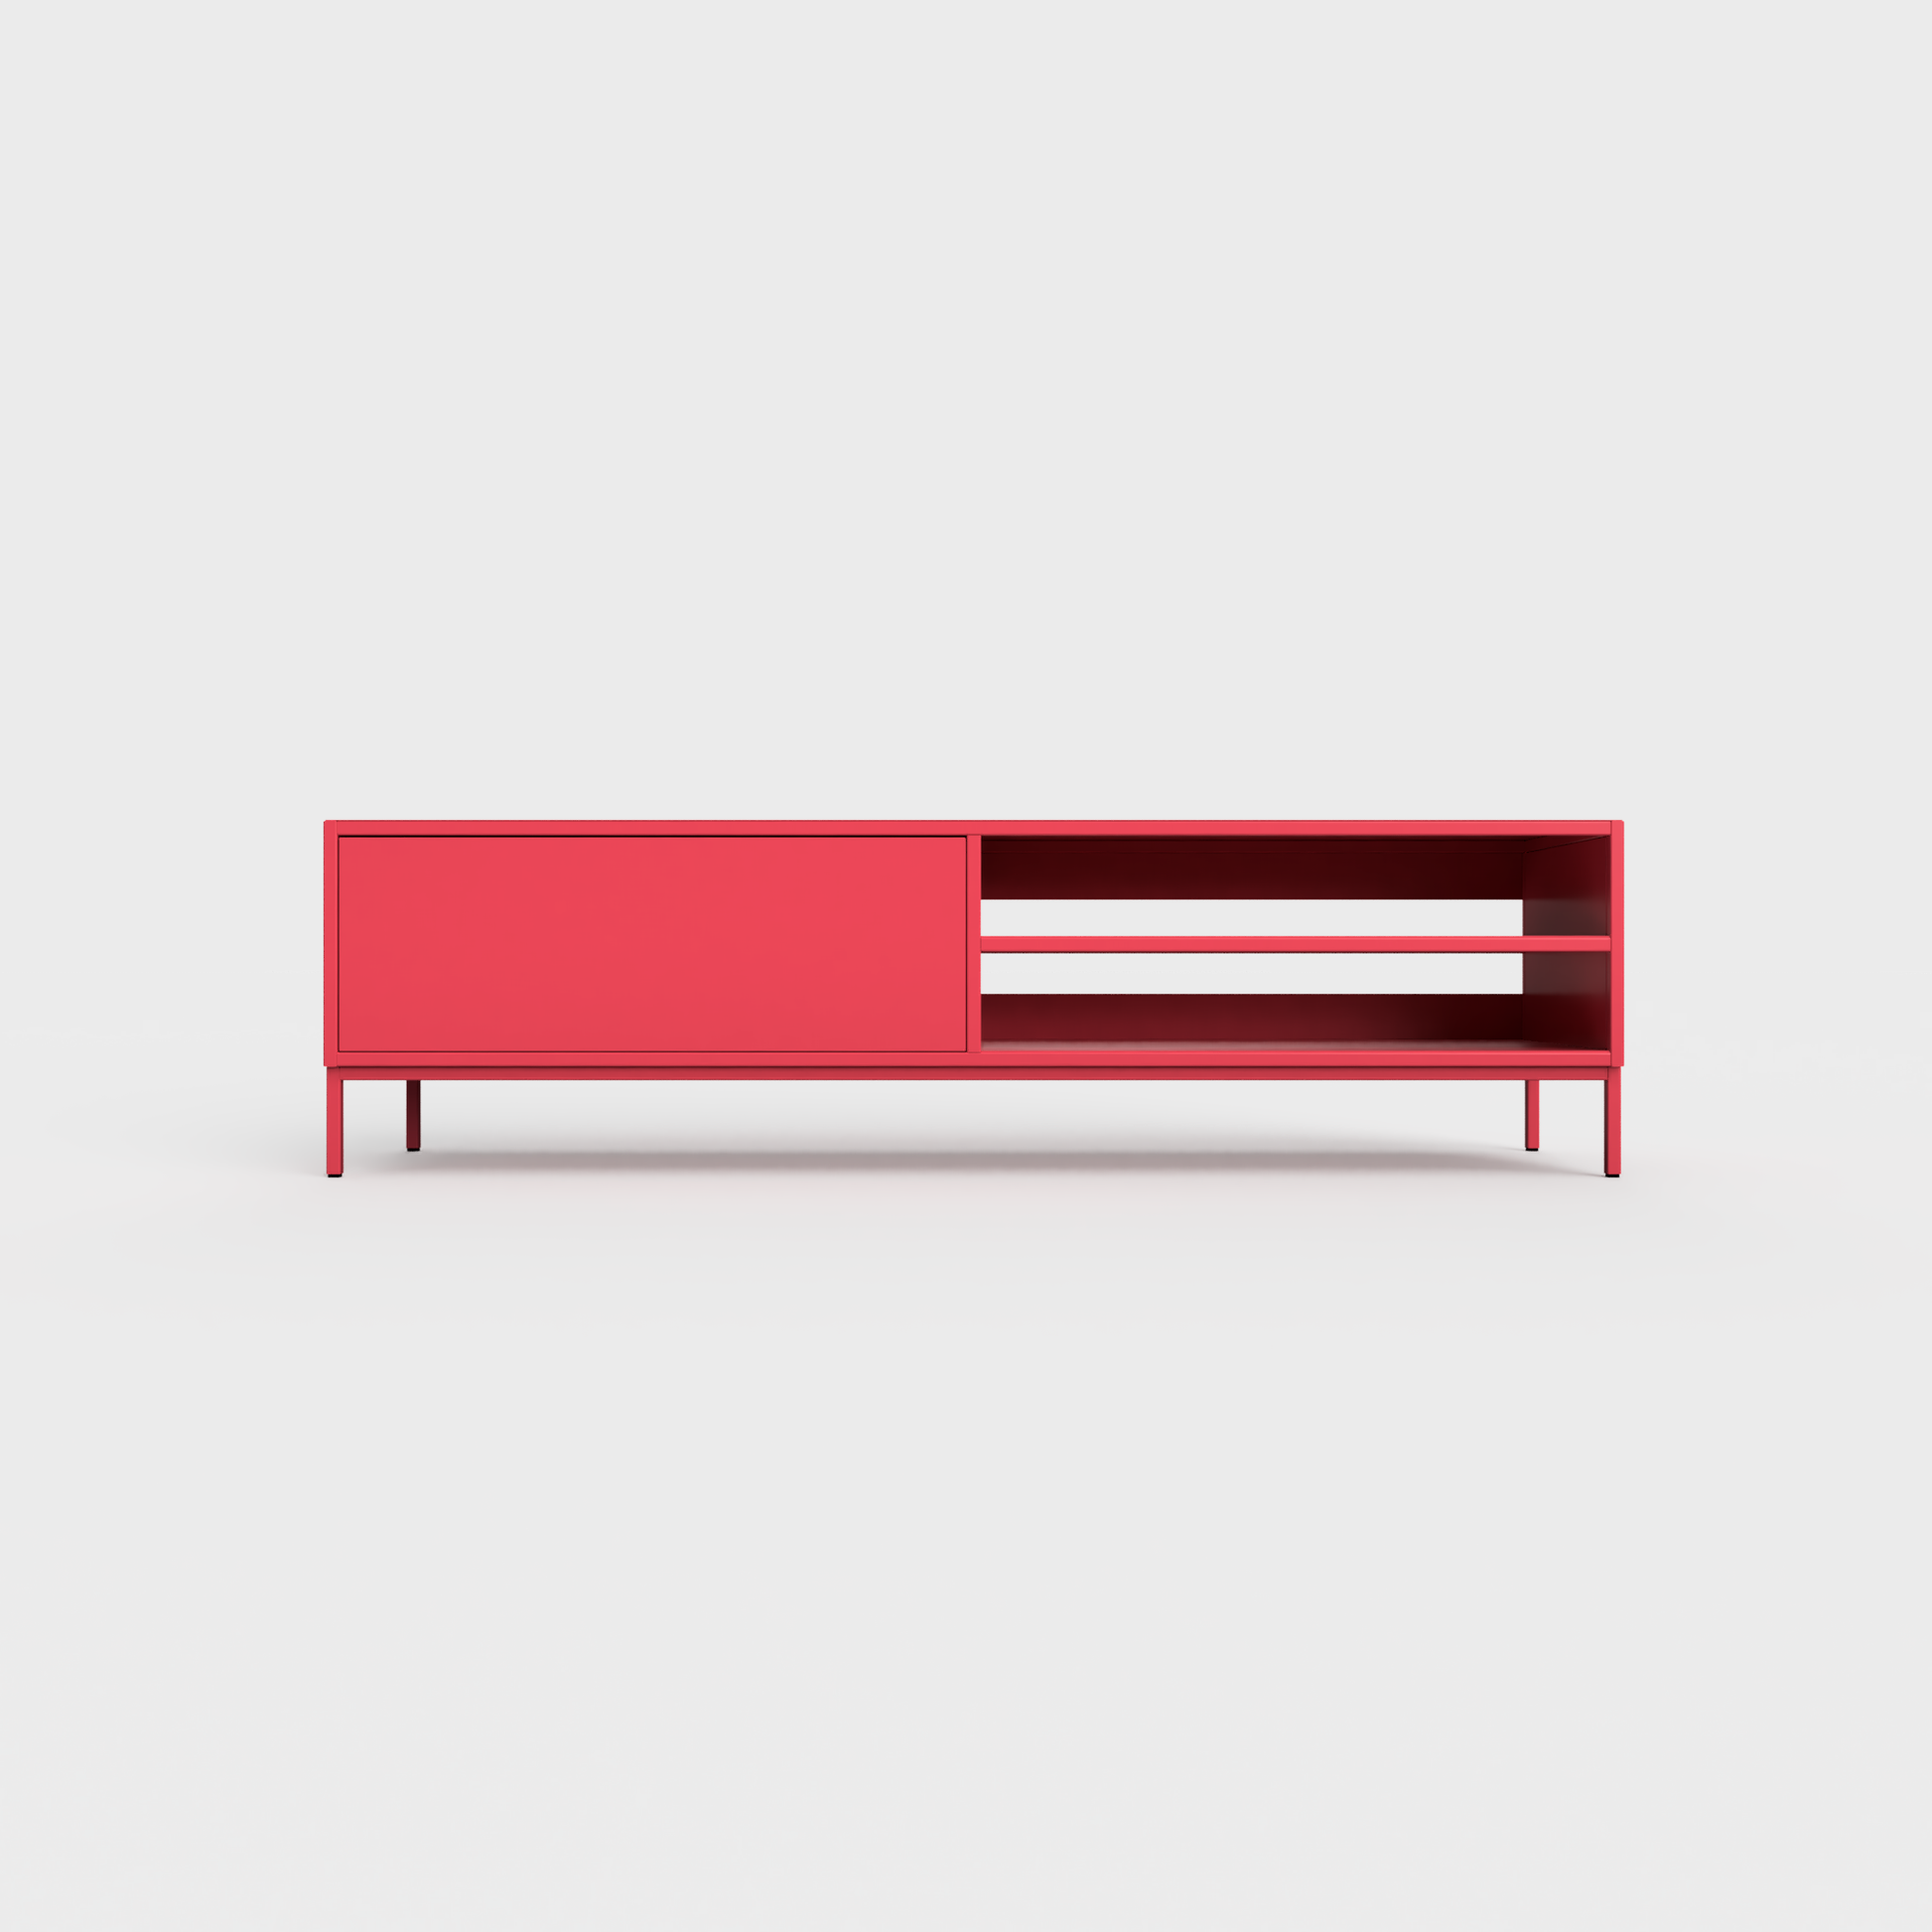 Prunus 02 Lowboard in Raspberry color, powder-coated steel, elegant and modern piece of furniture for your living room